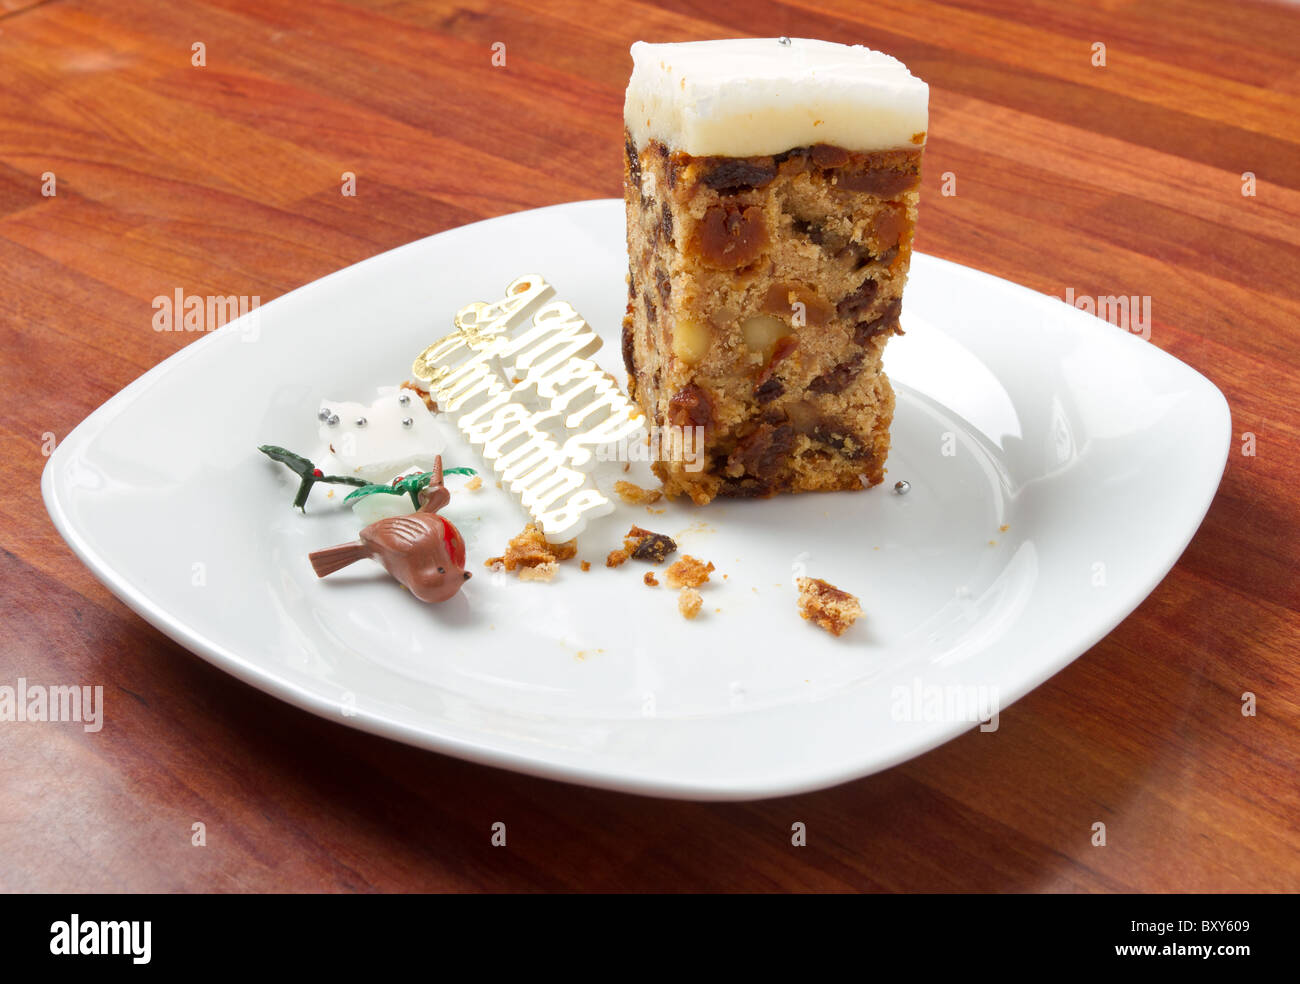 Last piece of Christmas cake on plate with crumbs and decorations. Stock Photo